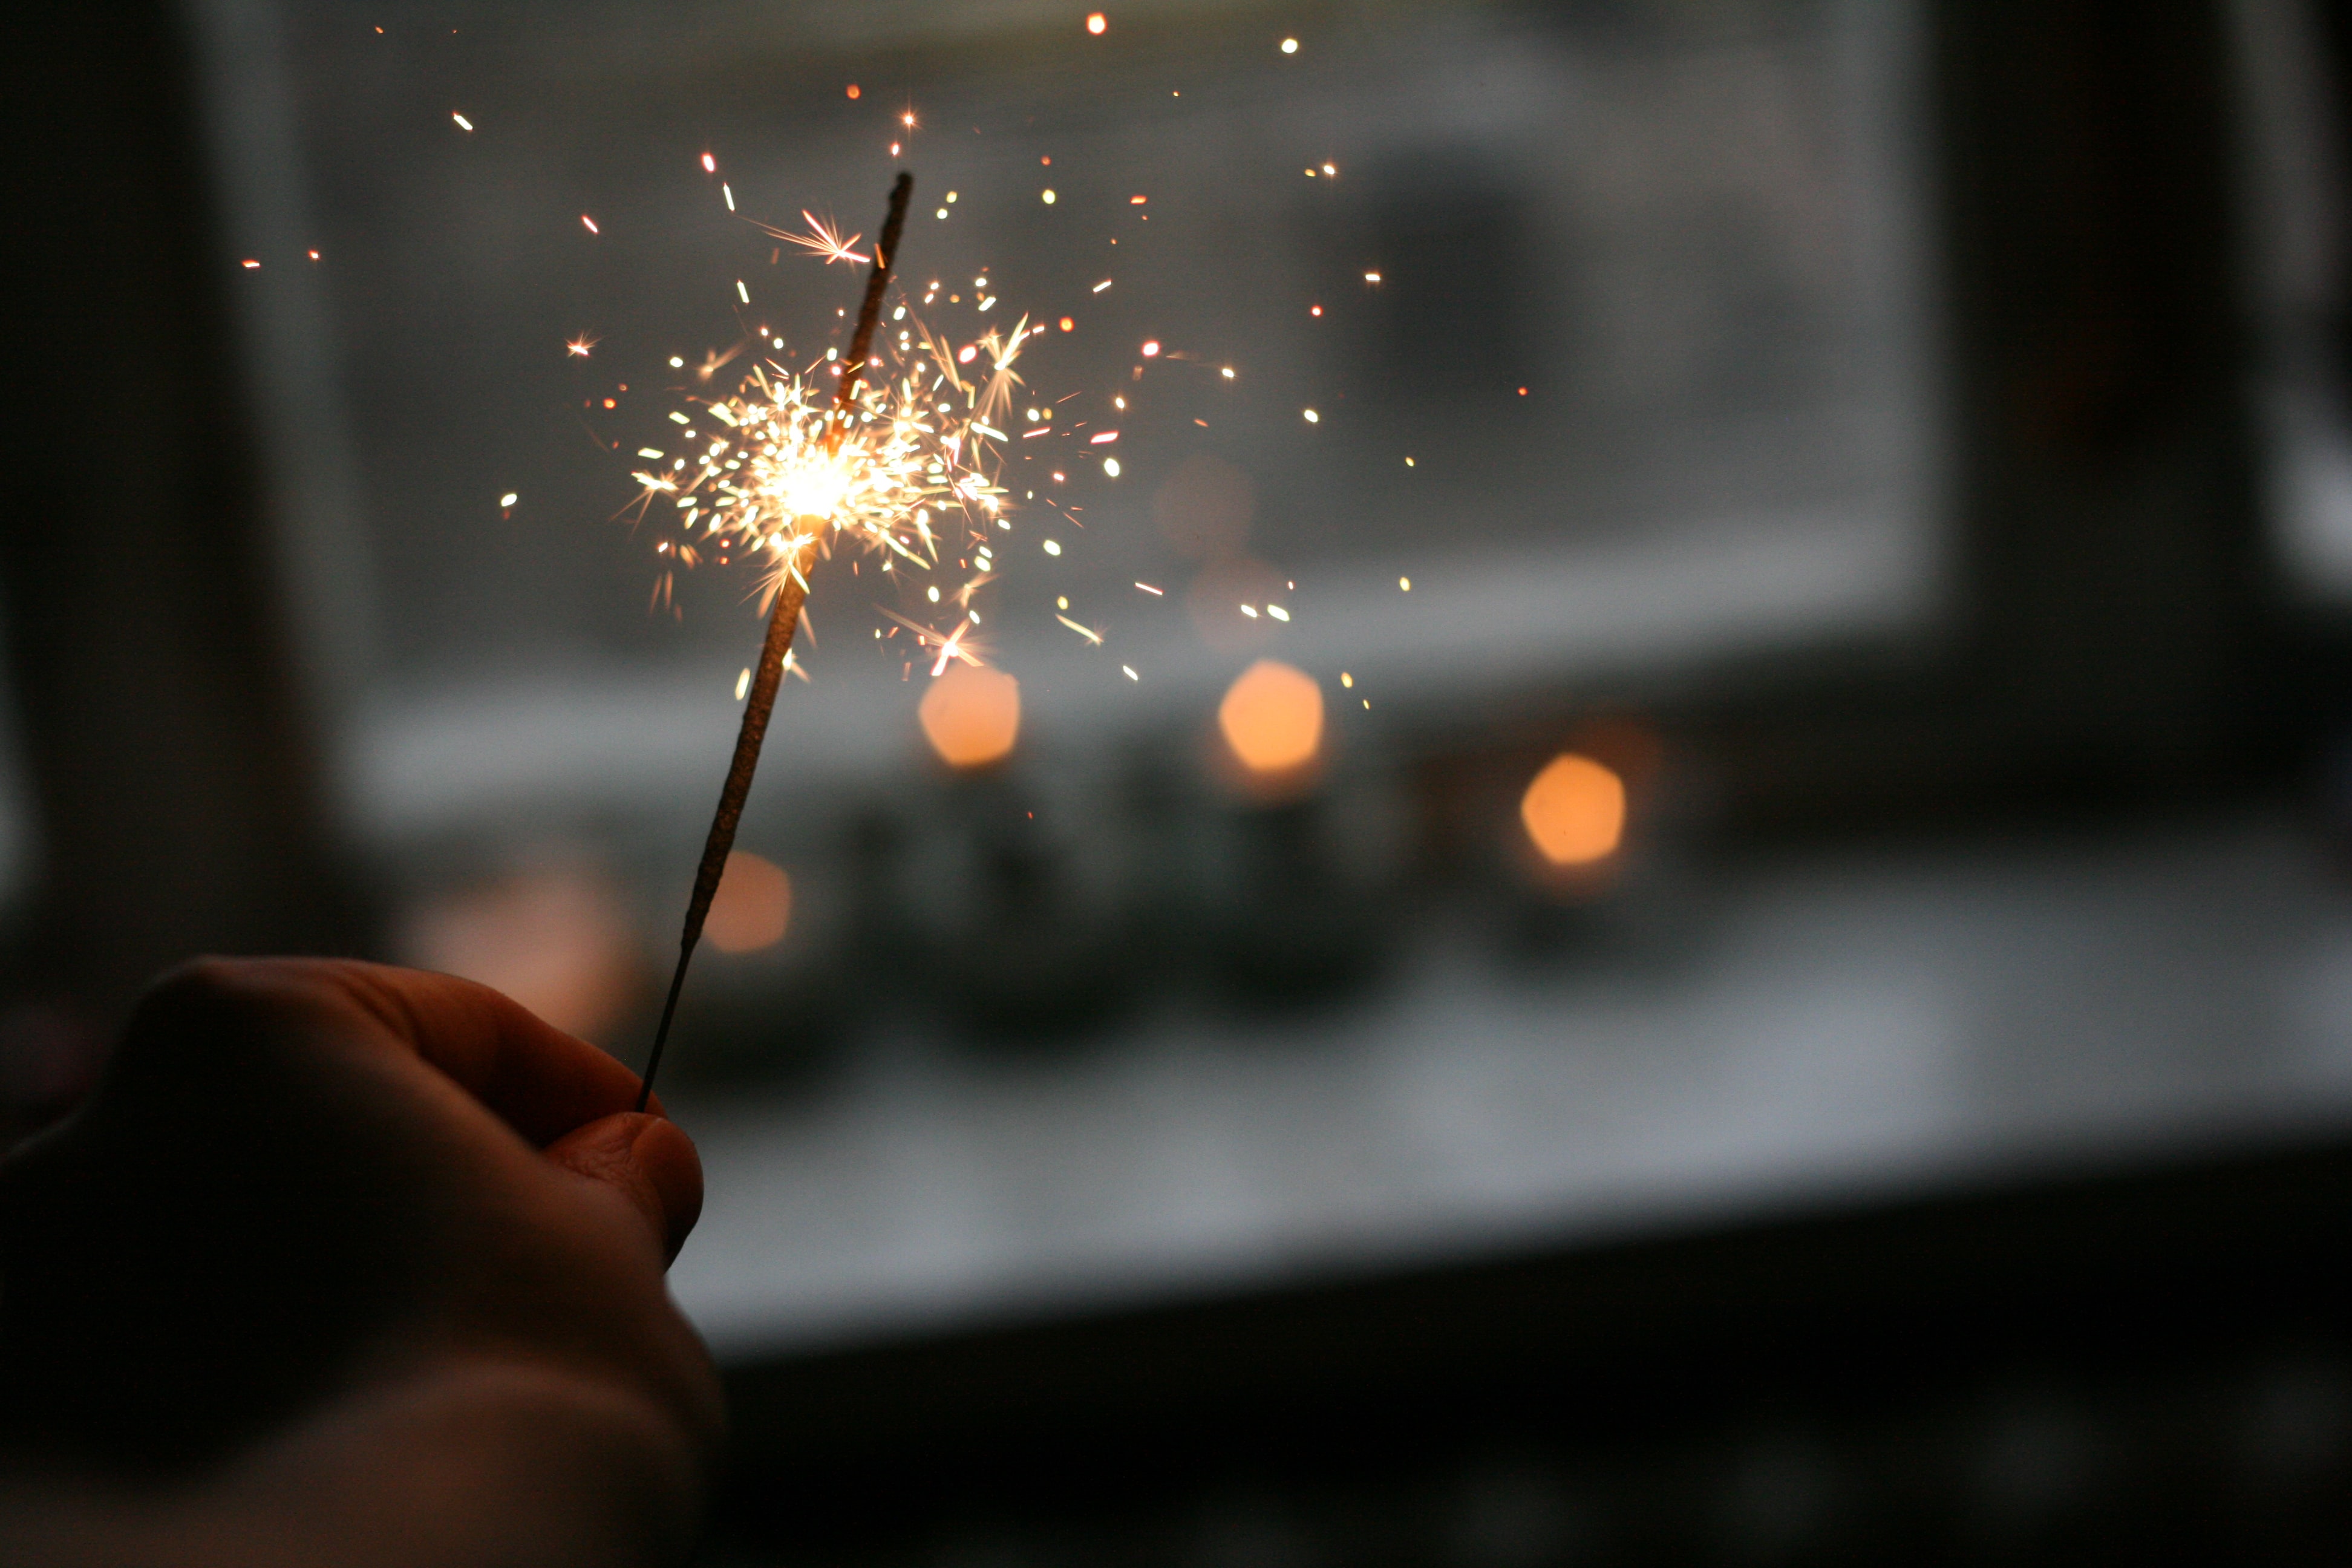 Hand holding a sparkler which is half way through burning. There are sparks flying off the sparkler. The background is blurred but it appears to be that the sparkler is being burned indoors as there is an outline of a window and a windowsill